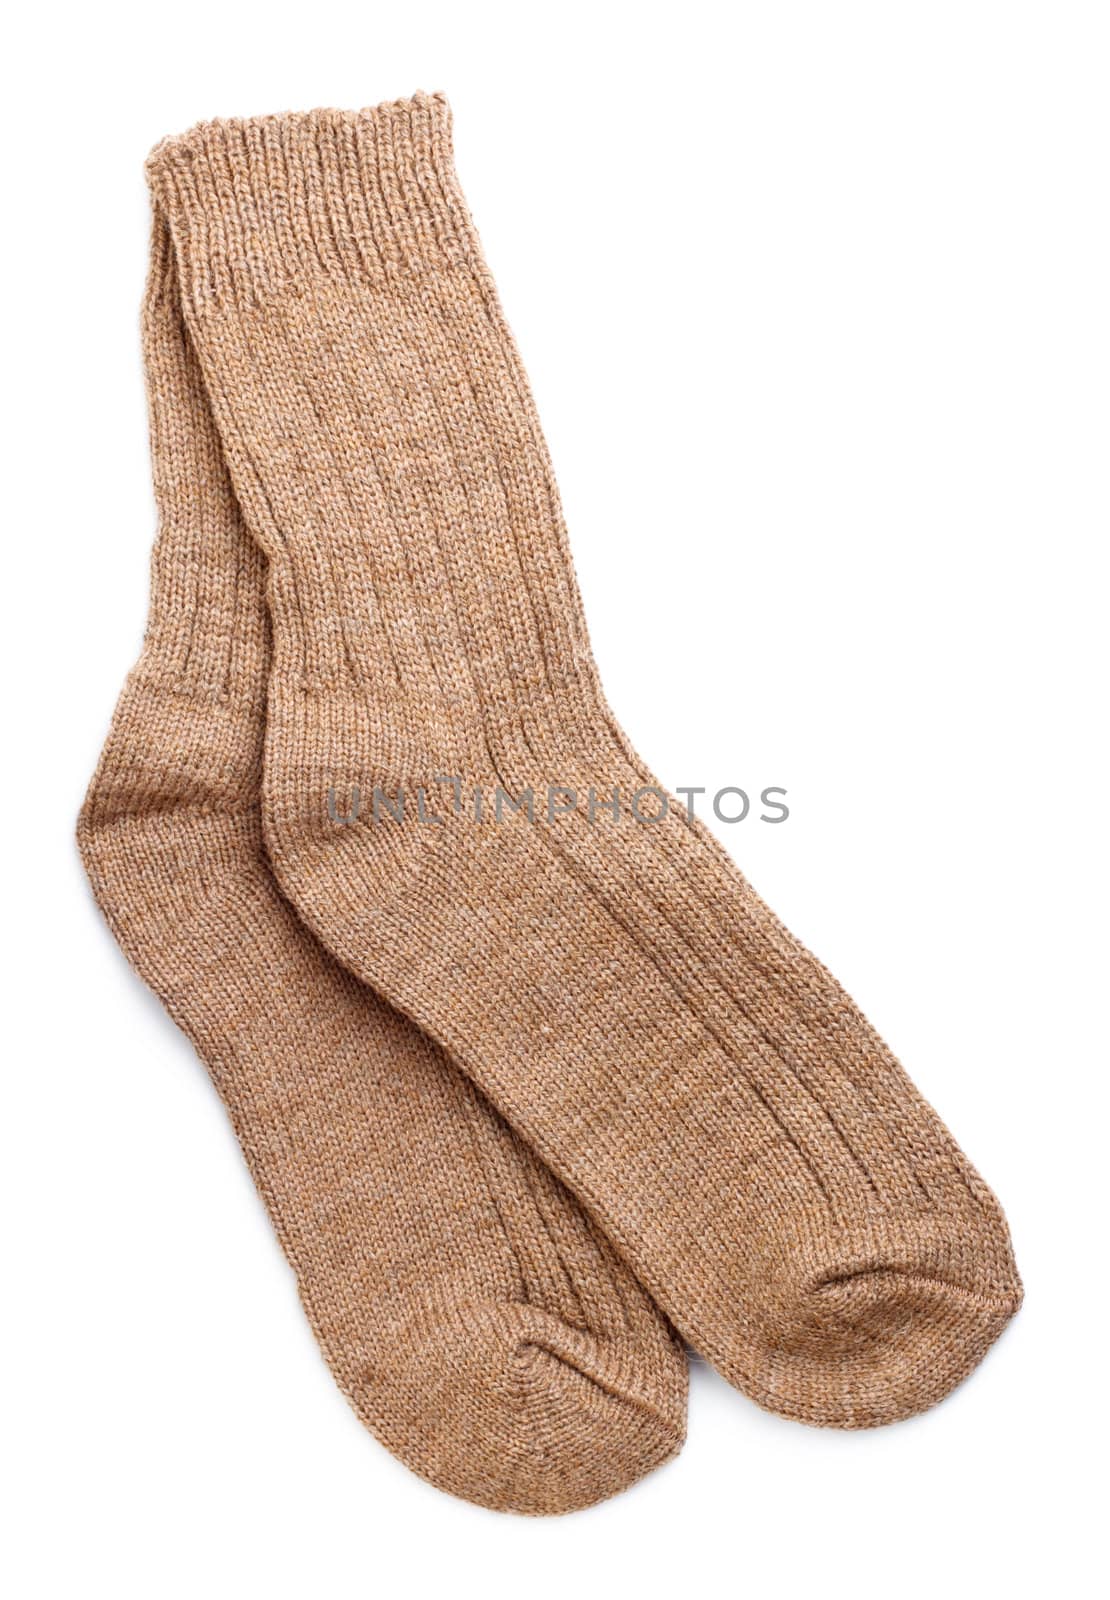 woollen socks pair isolated on white background